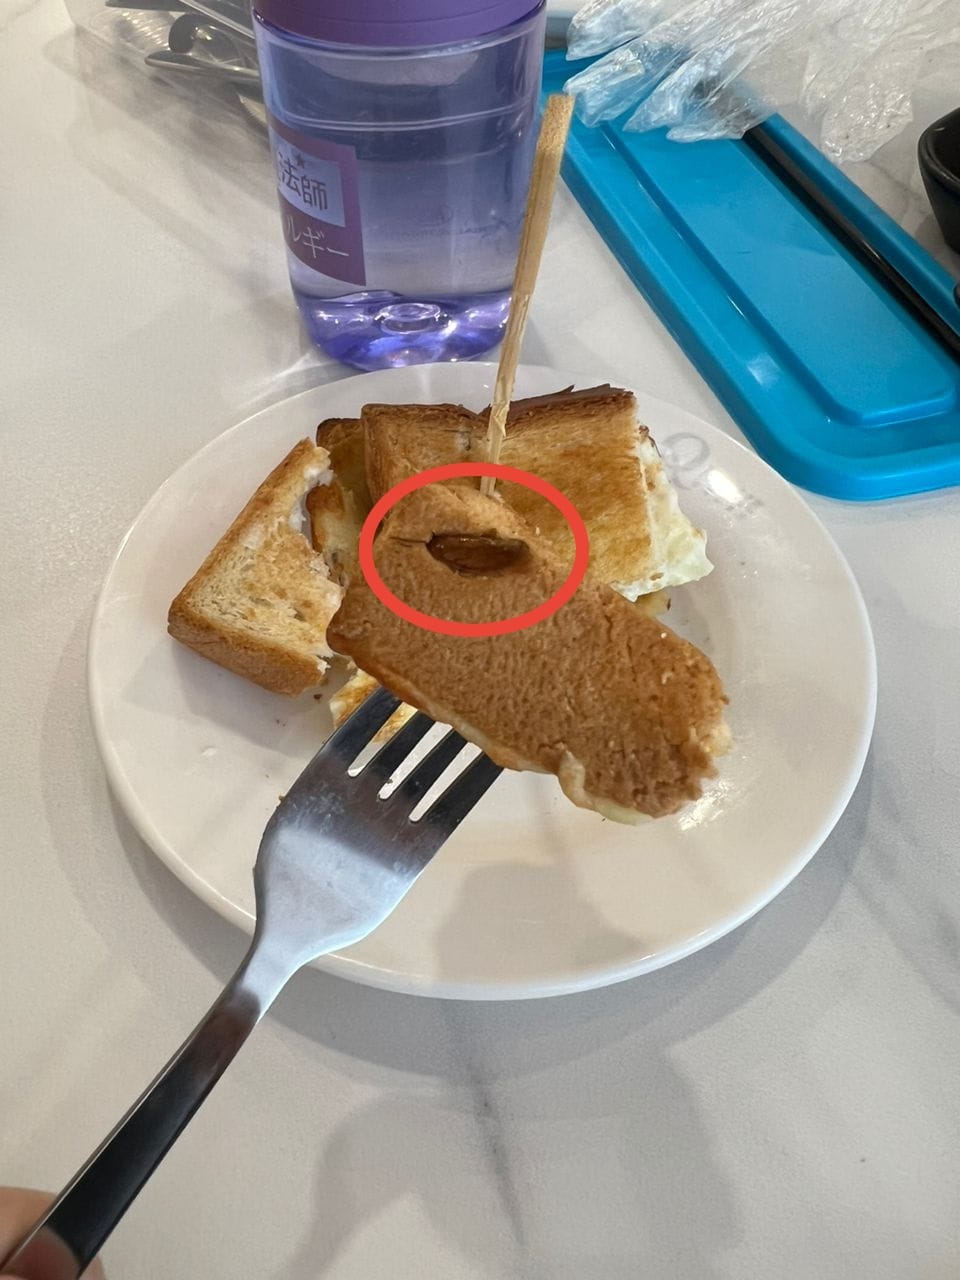 M'sian man shocked to find dead cockroach inside toasted bread at puchong eatery